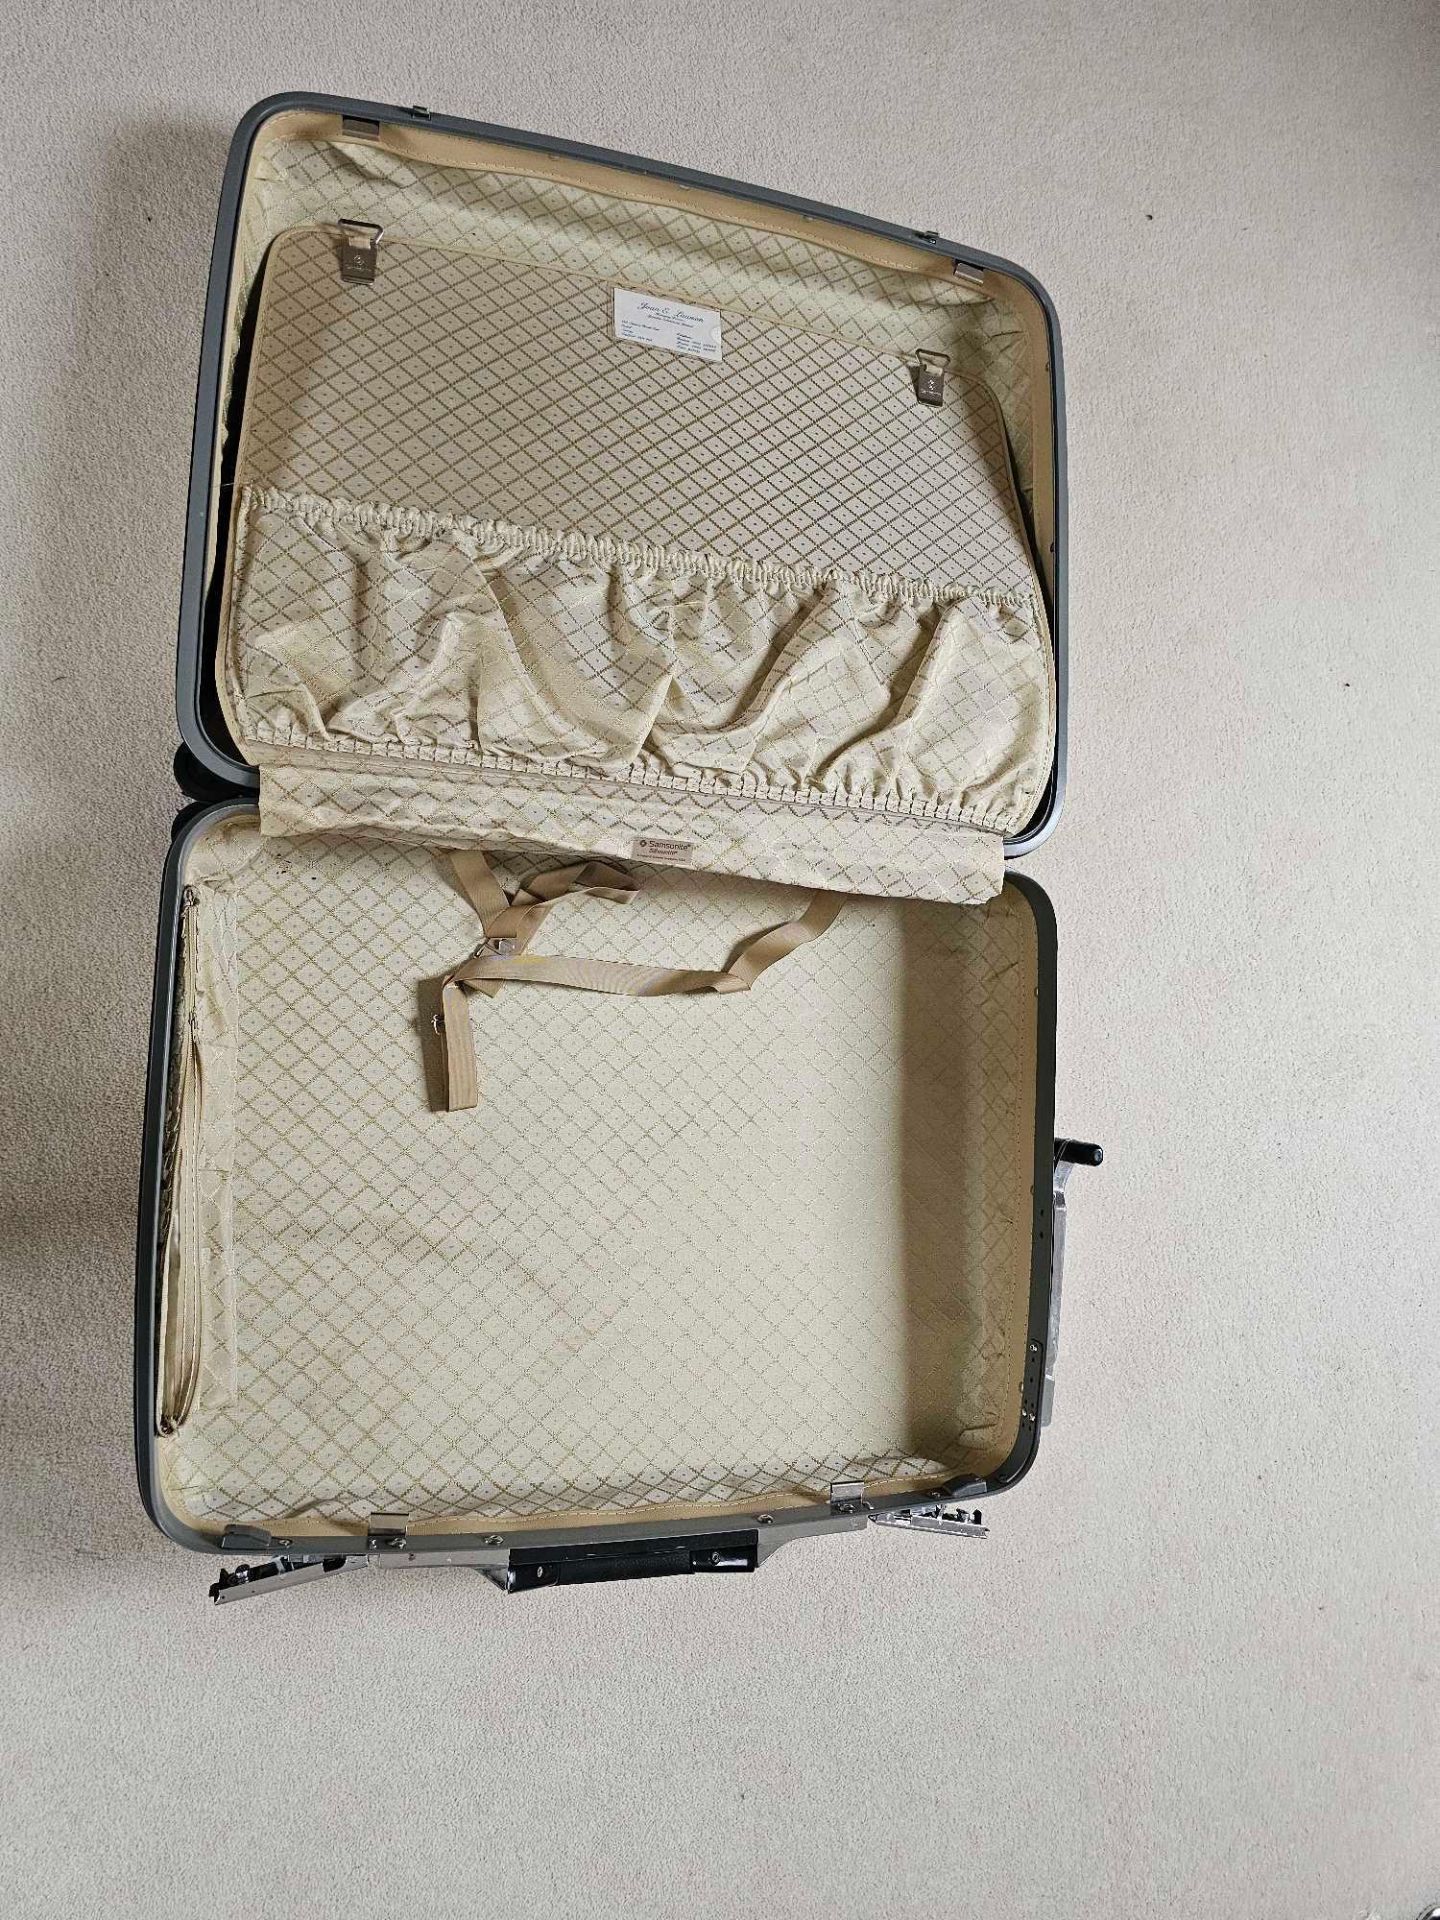 A Vintage 1960s Samsonite Silhouette Hard Shell Luggage Suitcase With Liner Intact